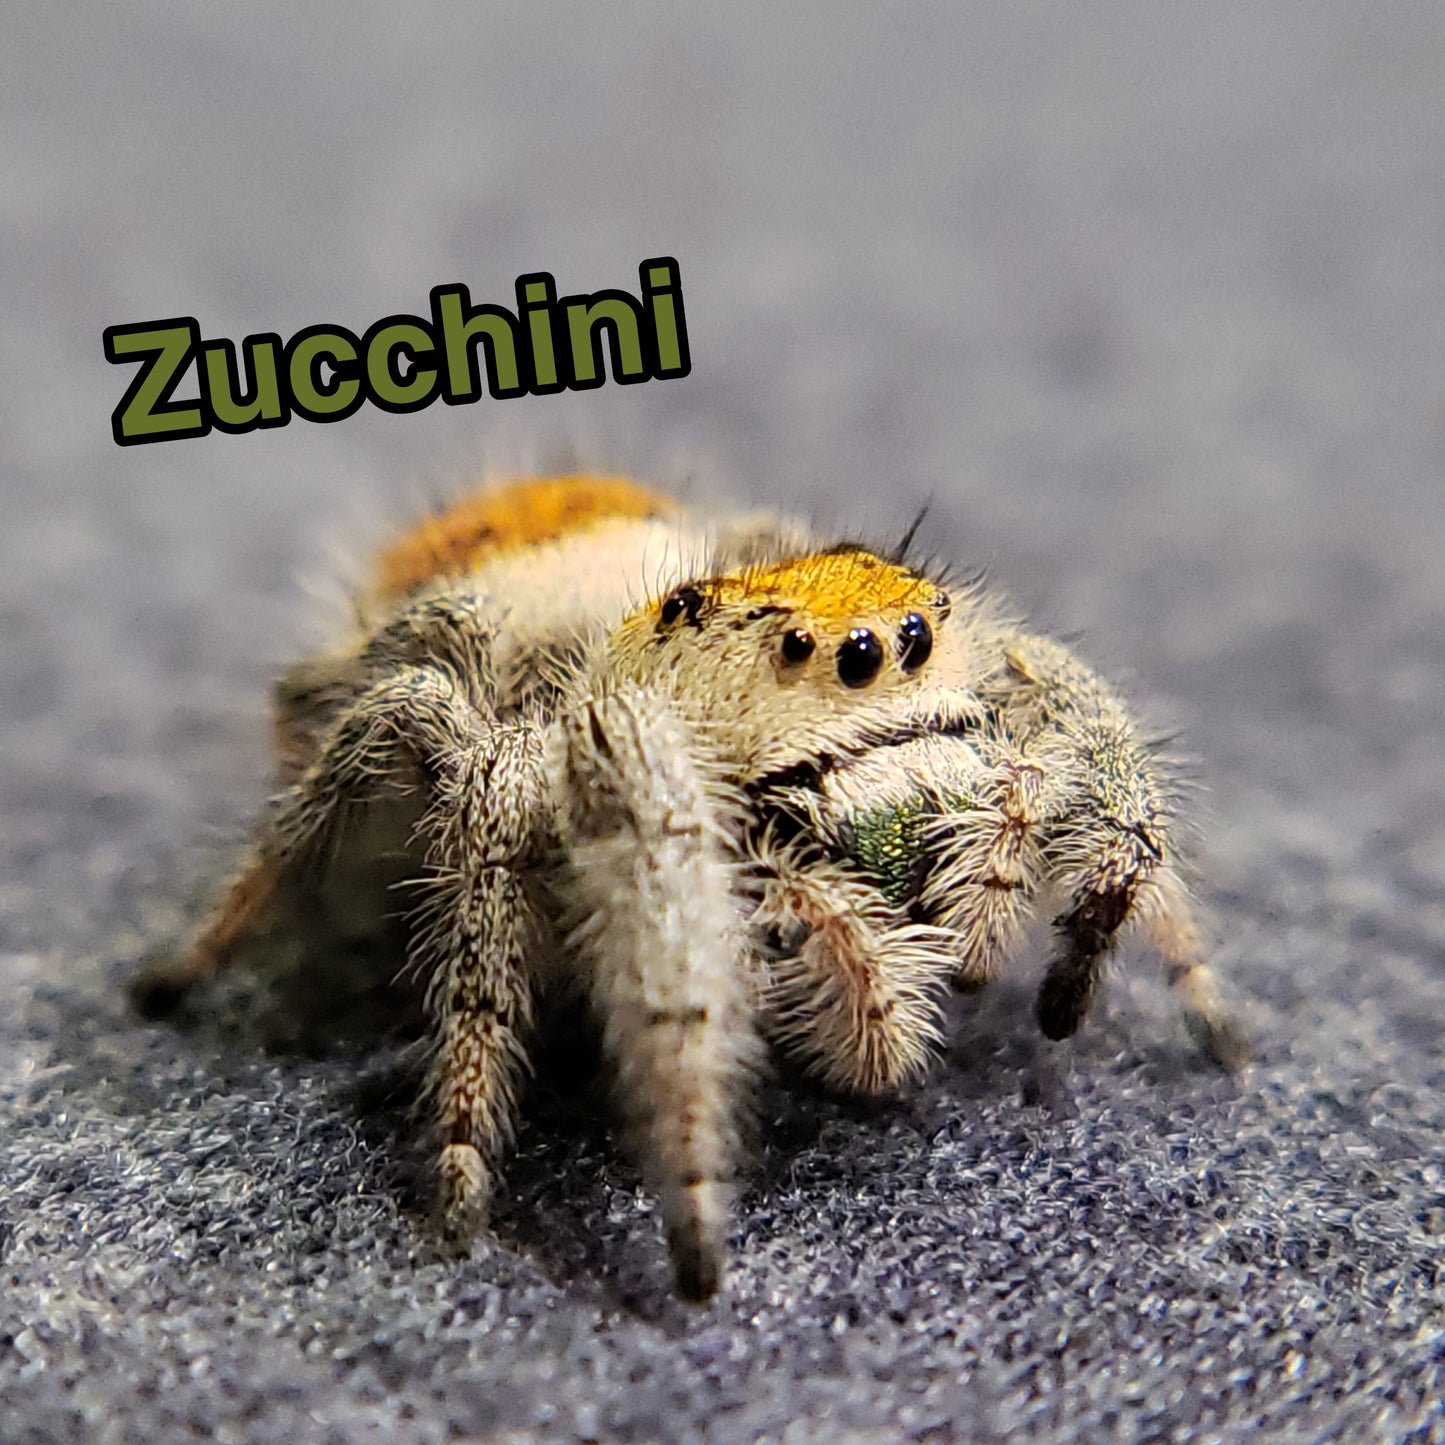 Regal Jumping Spider "Zucchini" - Jumping Spiders For Sale - Spiders Source - #1 Regal Jumping Spider Store